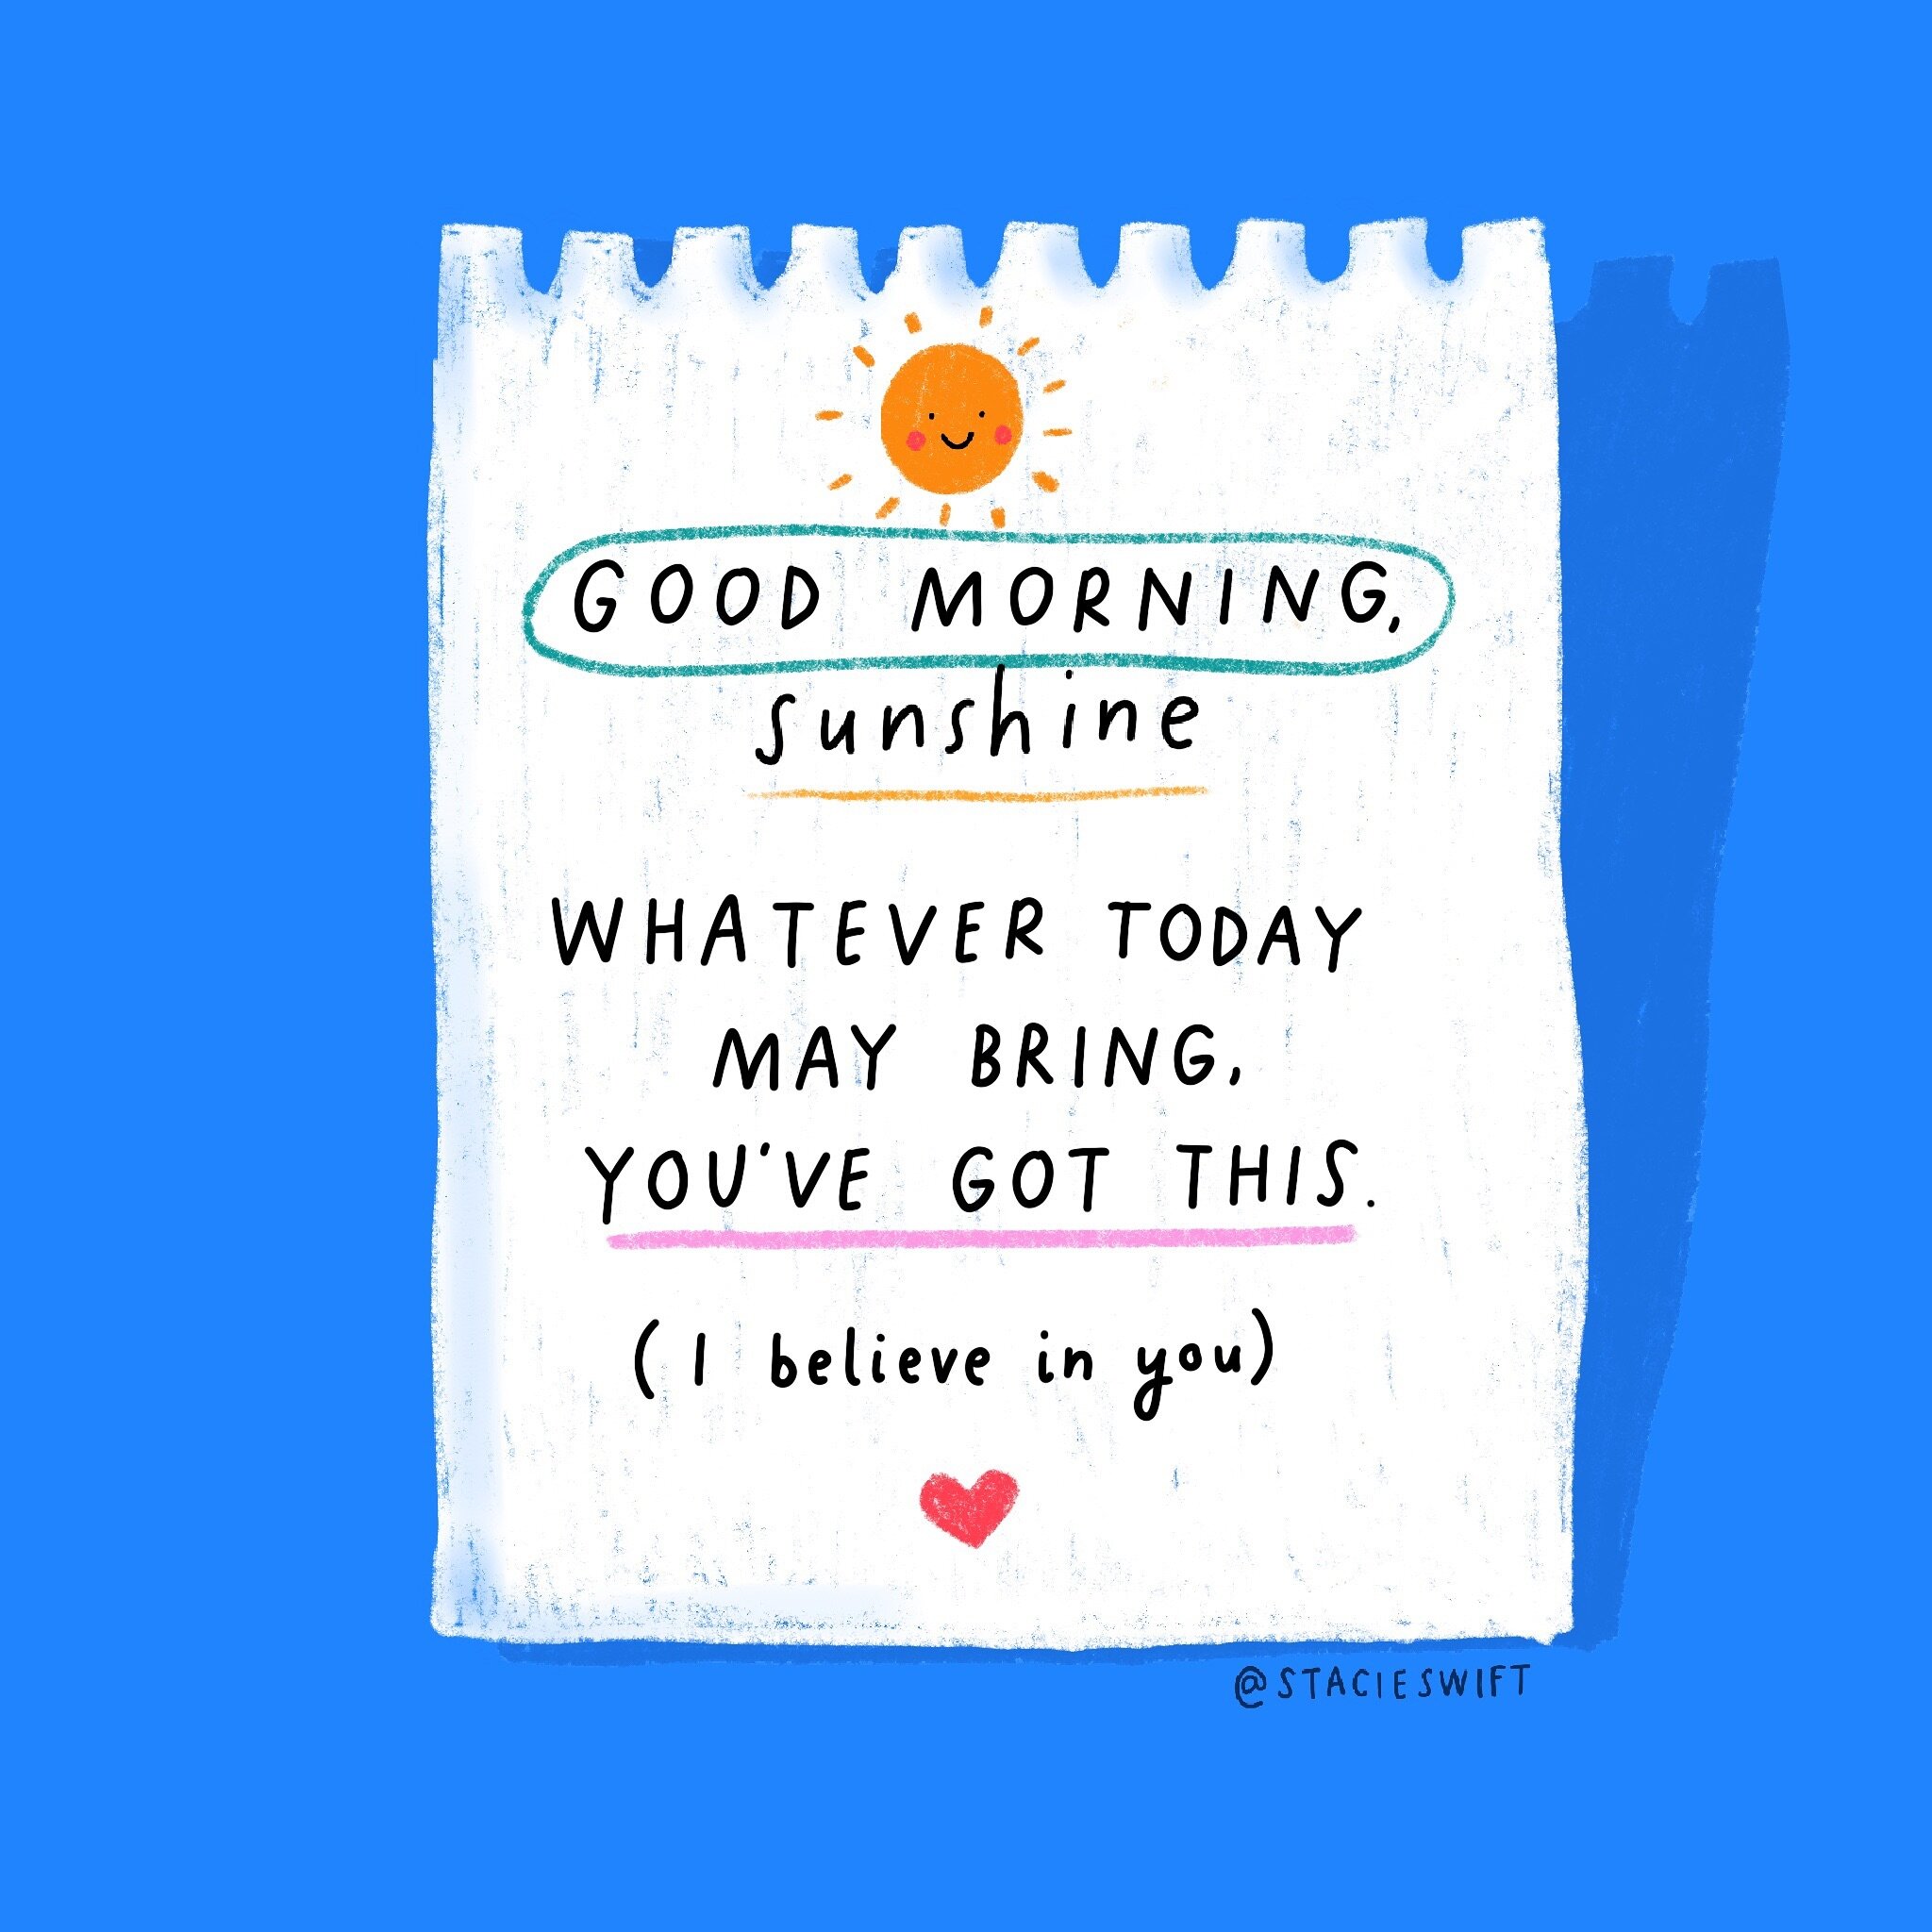 Good morning 🌞 

Here&rsquo;s a reminder that whatever Monday throws at you, you&rsquo;ve got this!

Happy New Week ❤️